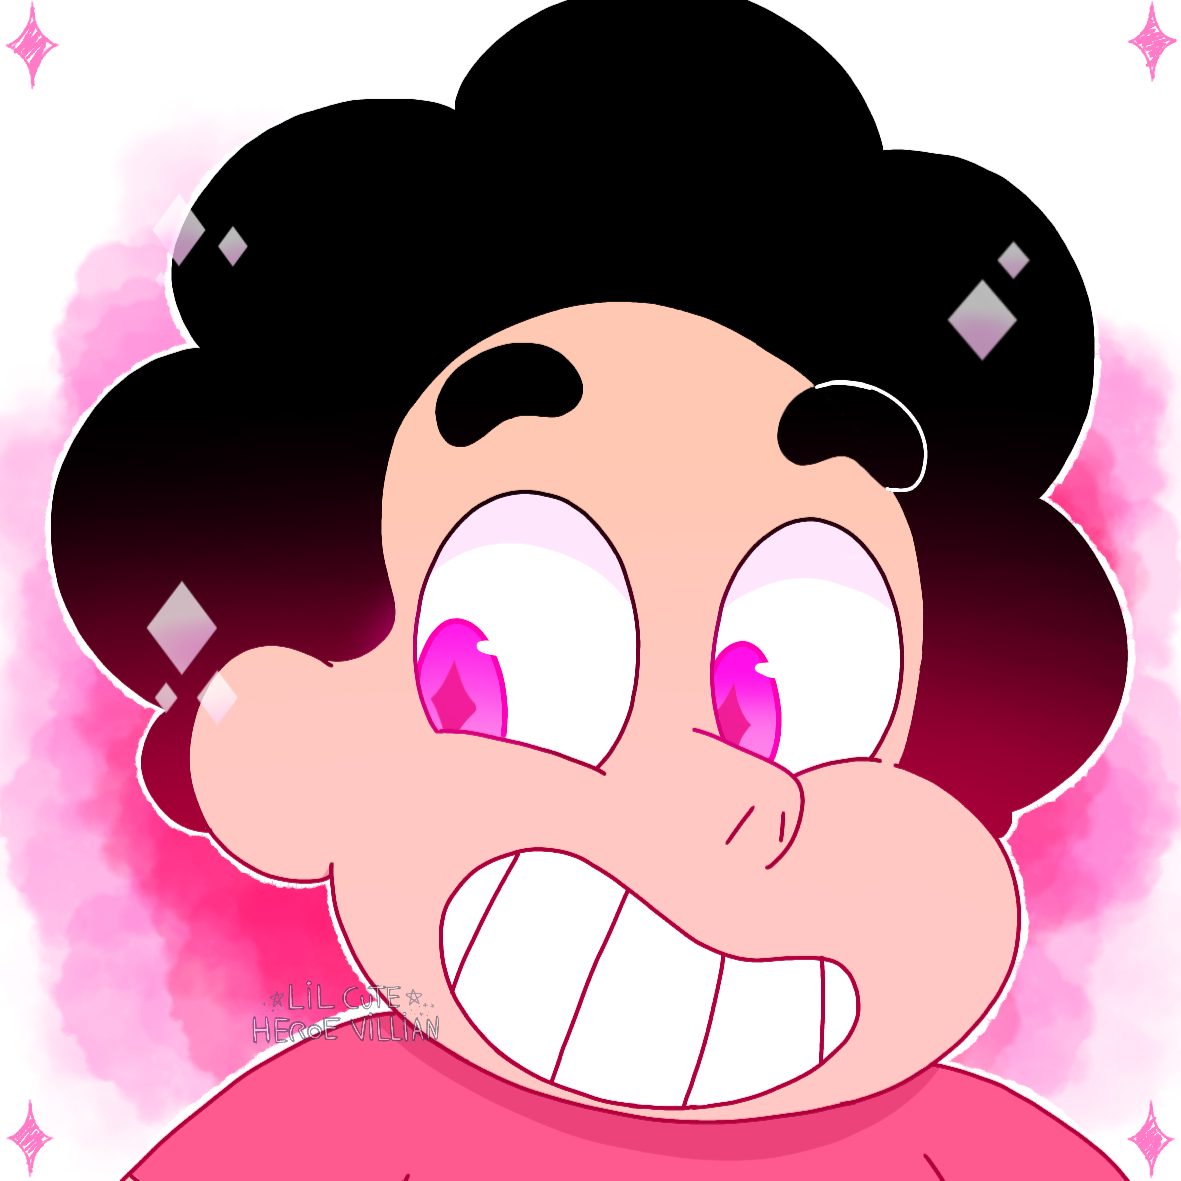 hey don’t be mad, this is the second time i draw steven